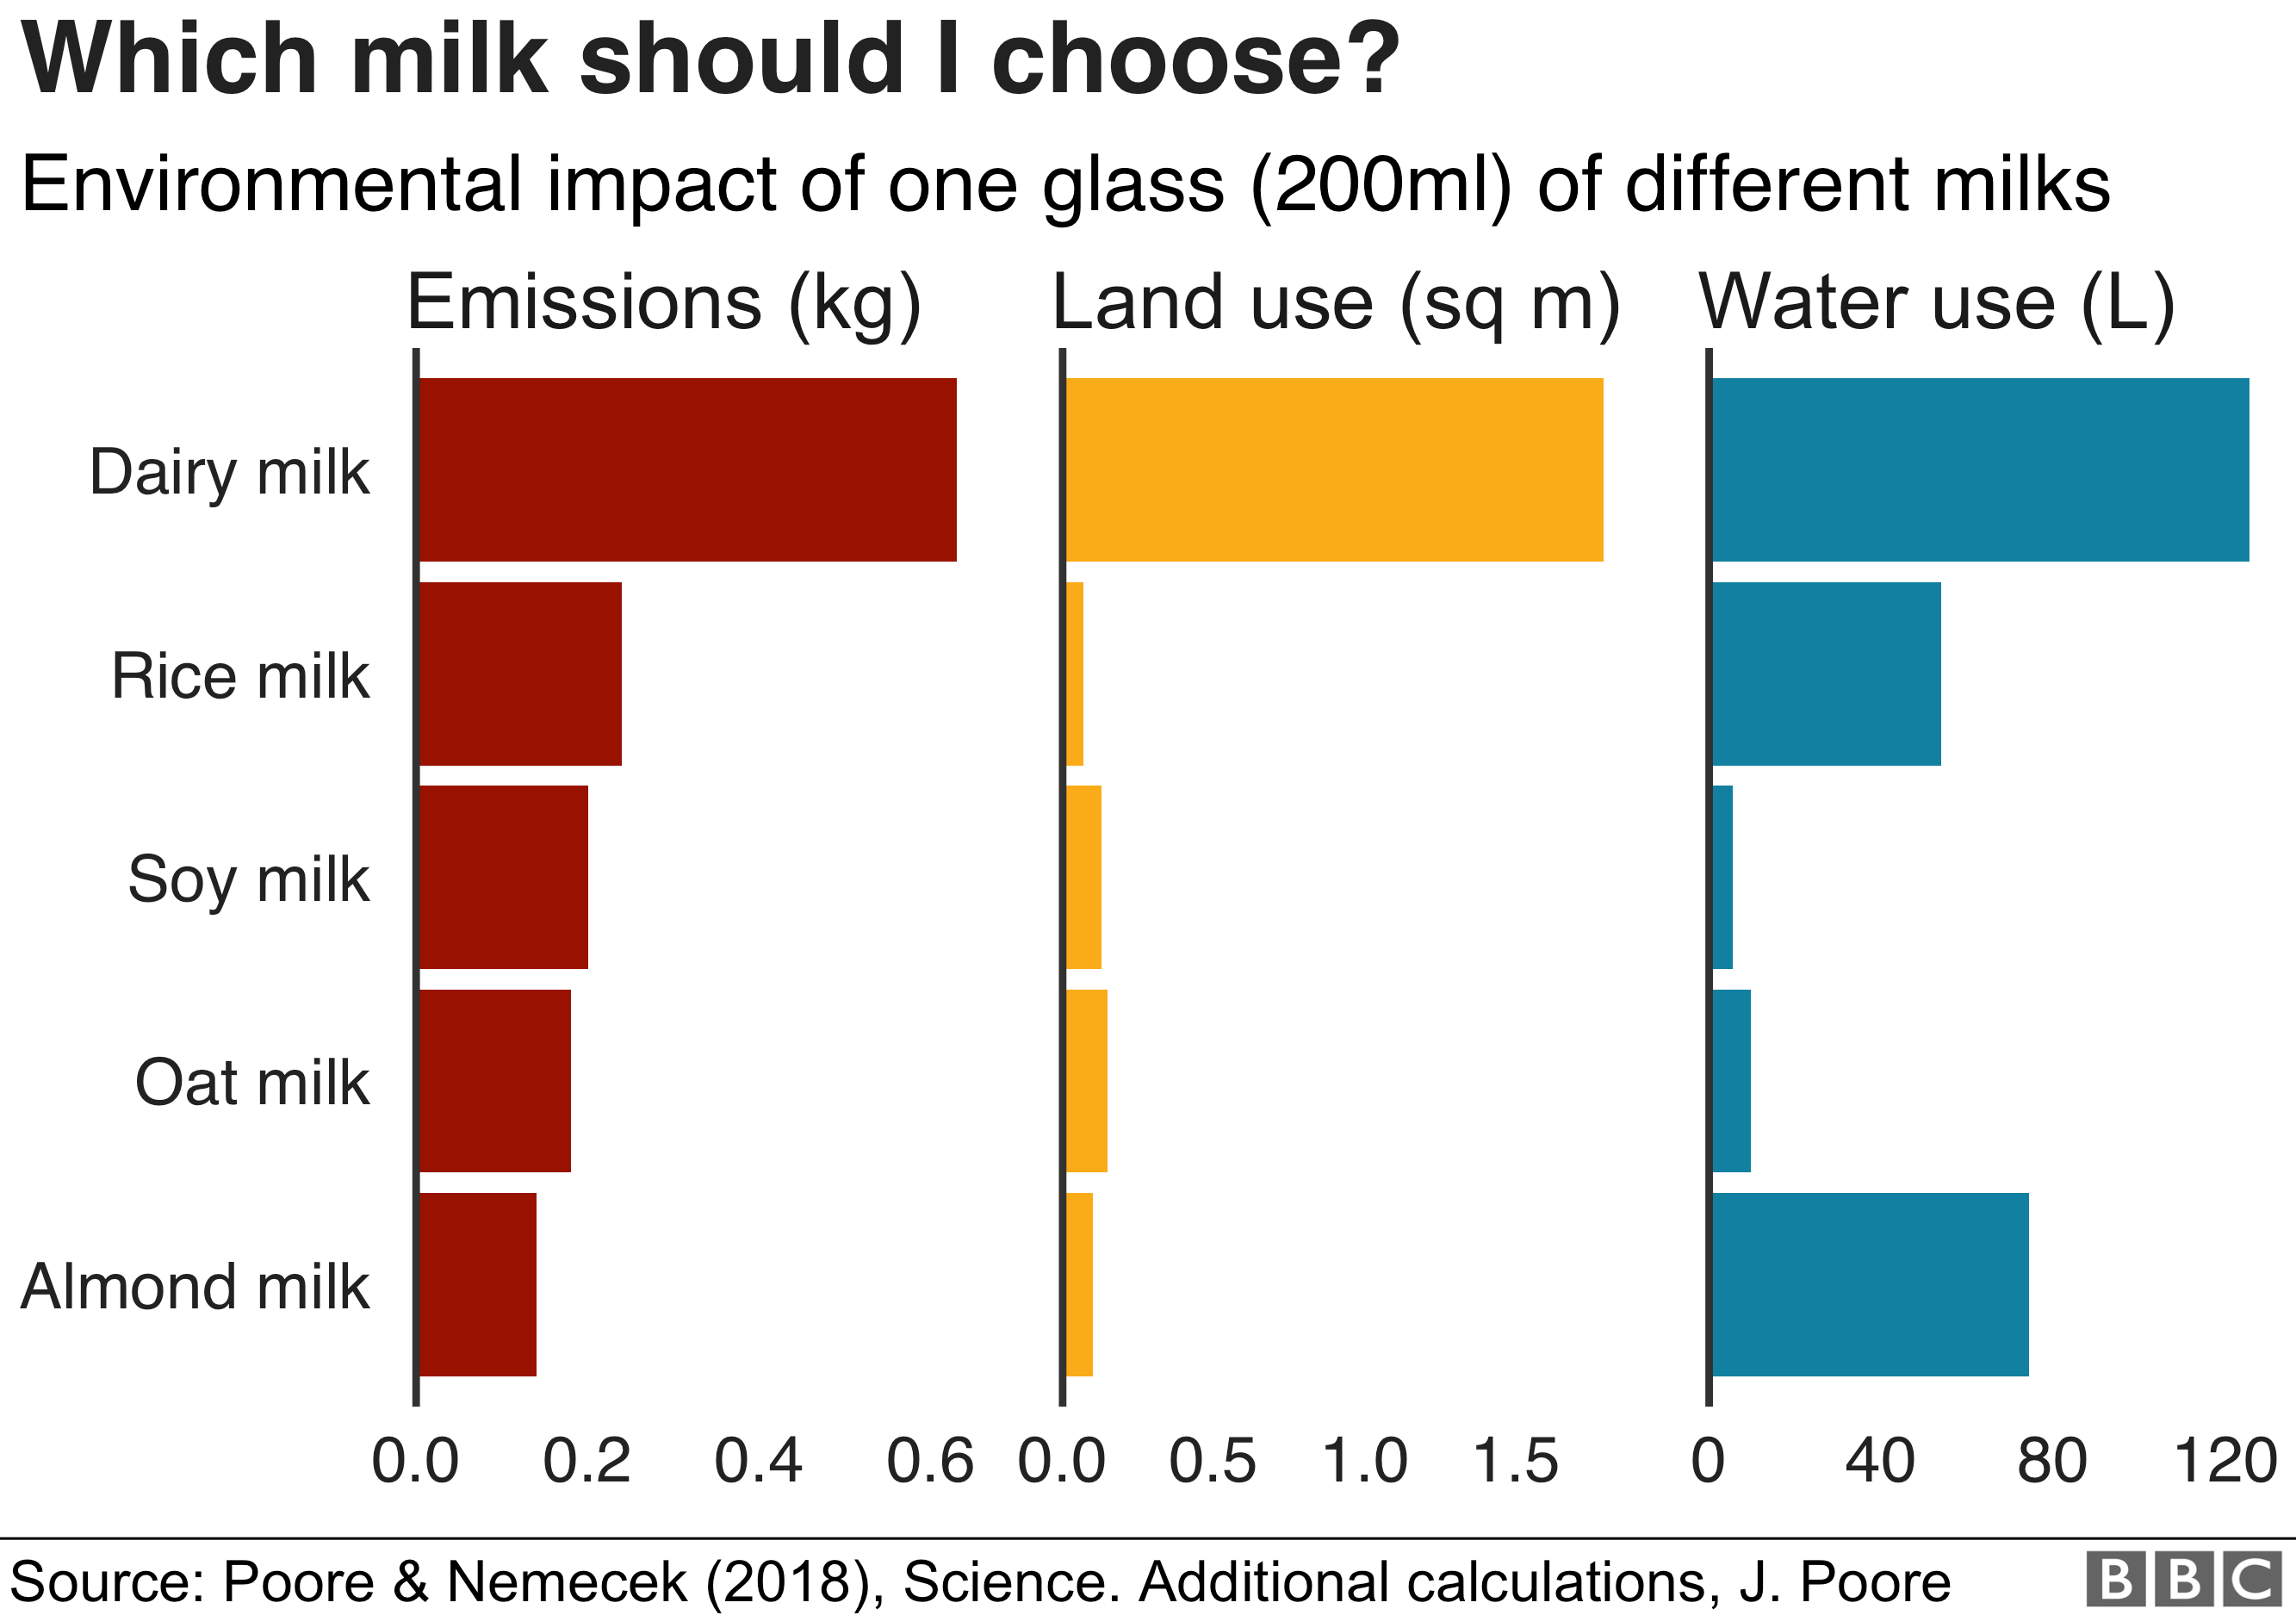 Charts On Environmental Issues